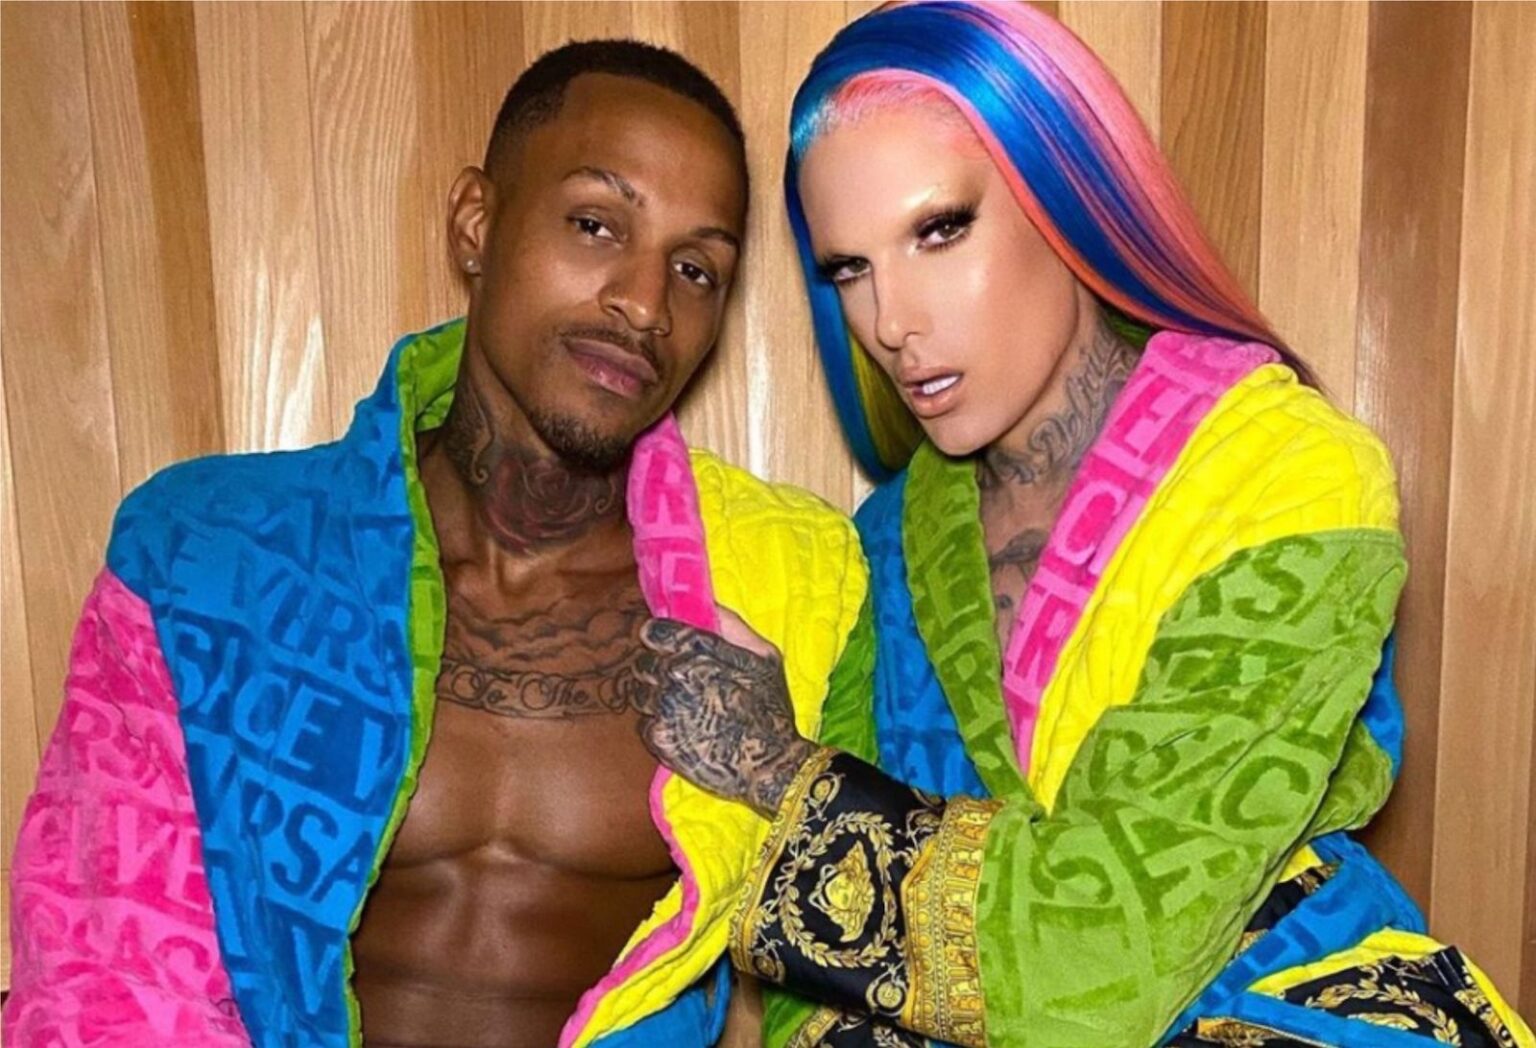 Jeffree Star has be embroiled in countless internet dramas at this point. Now people are wondering if his ex-boyfriend was a fake.